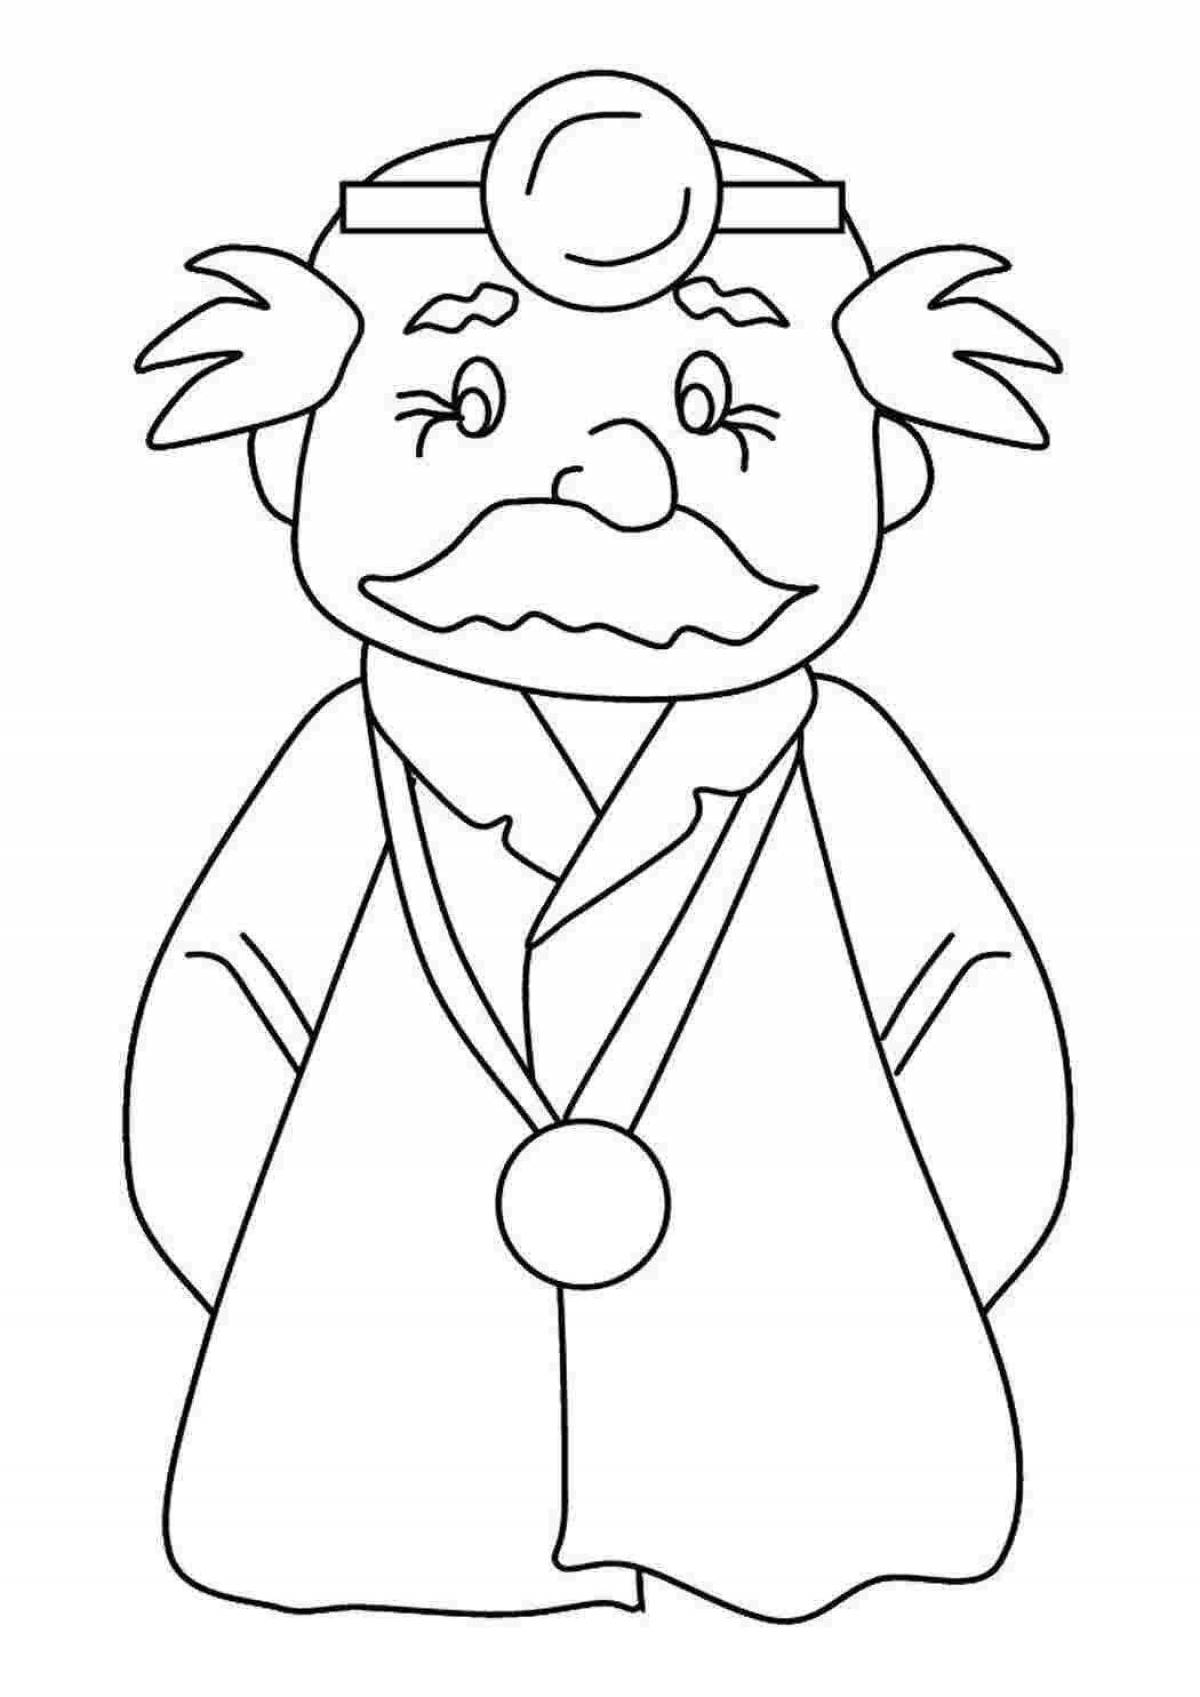 Impressive doctor coloring page